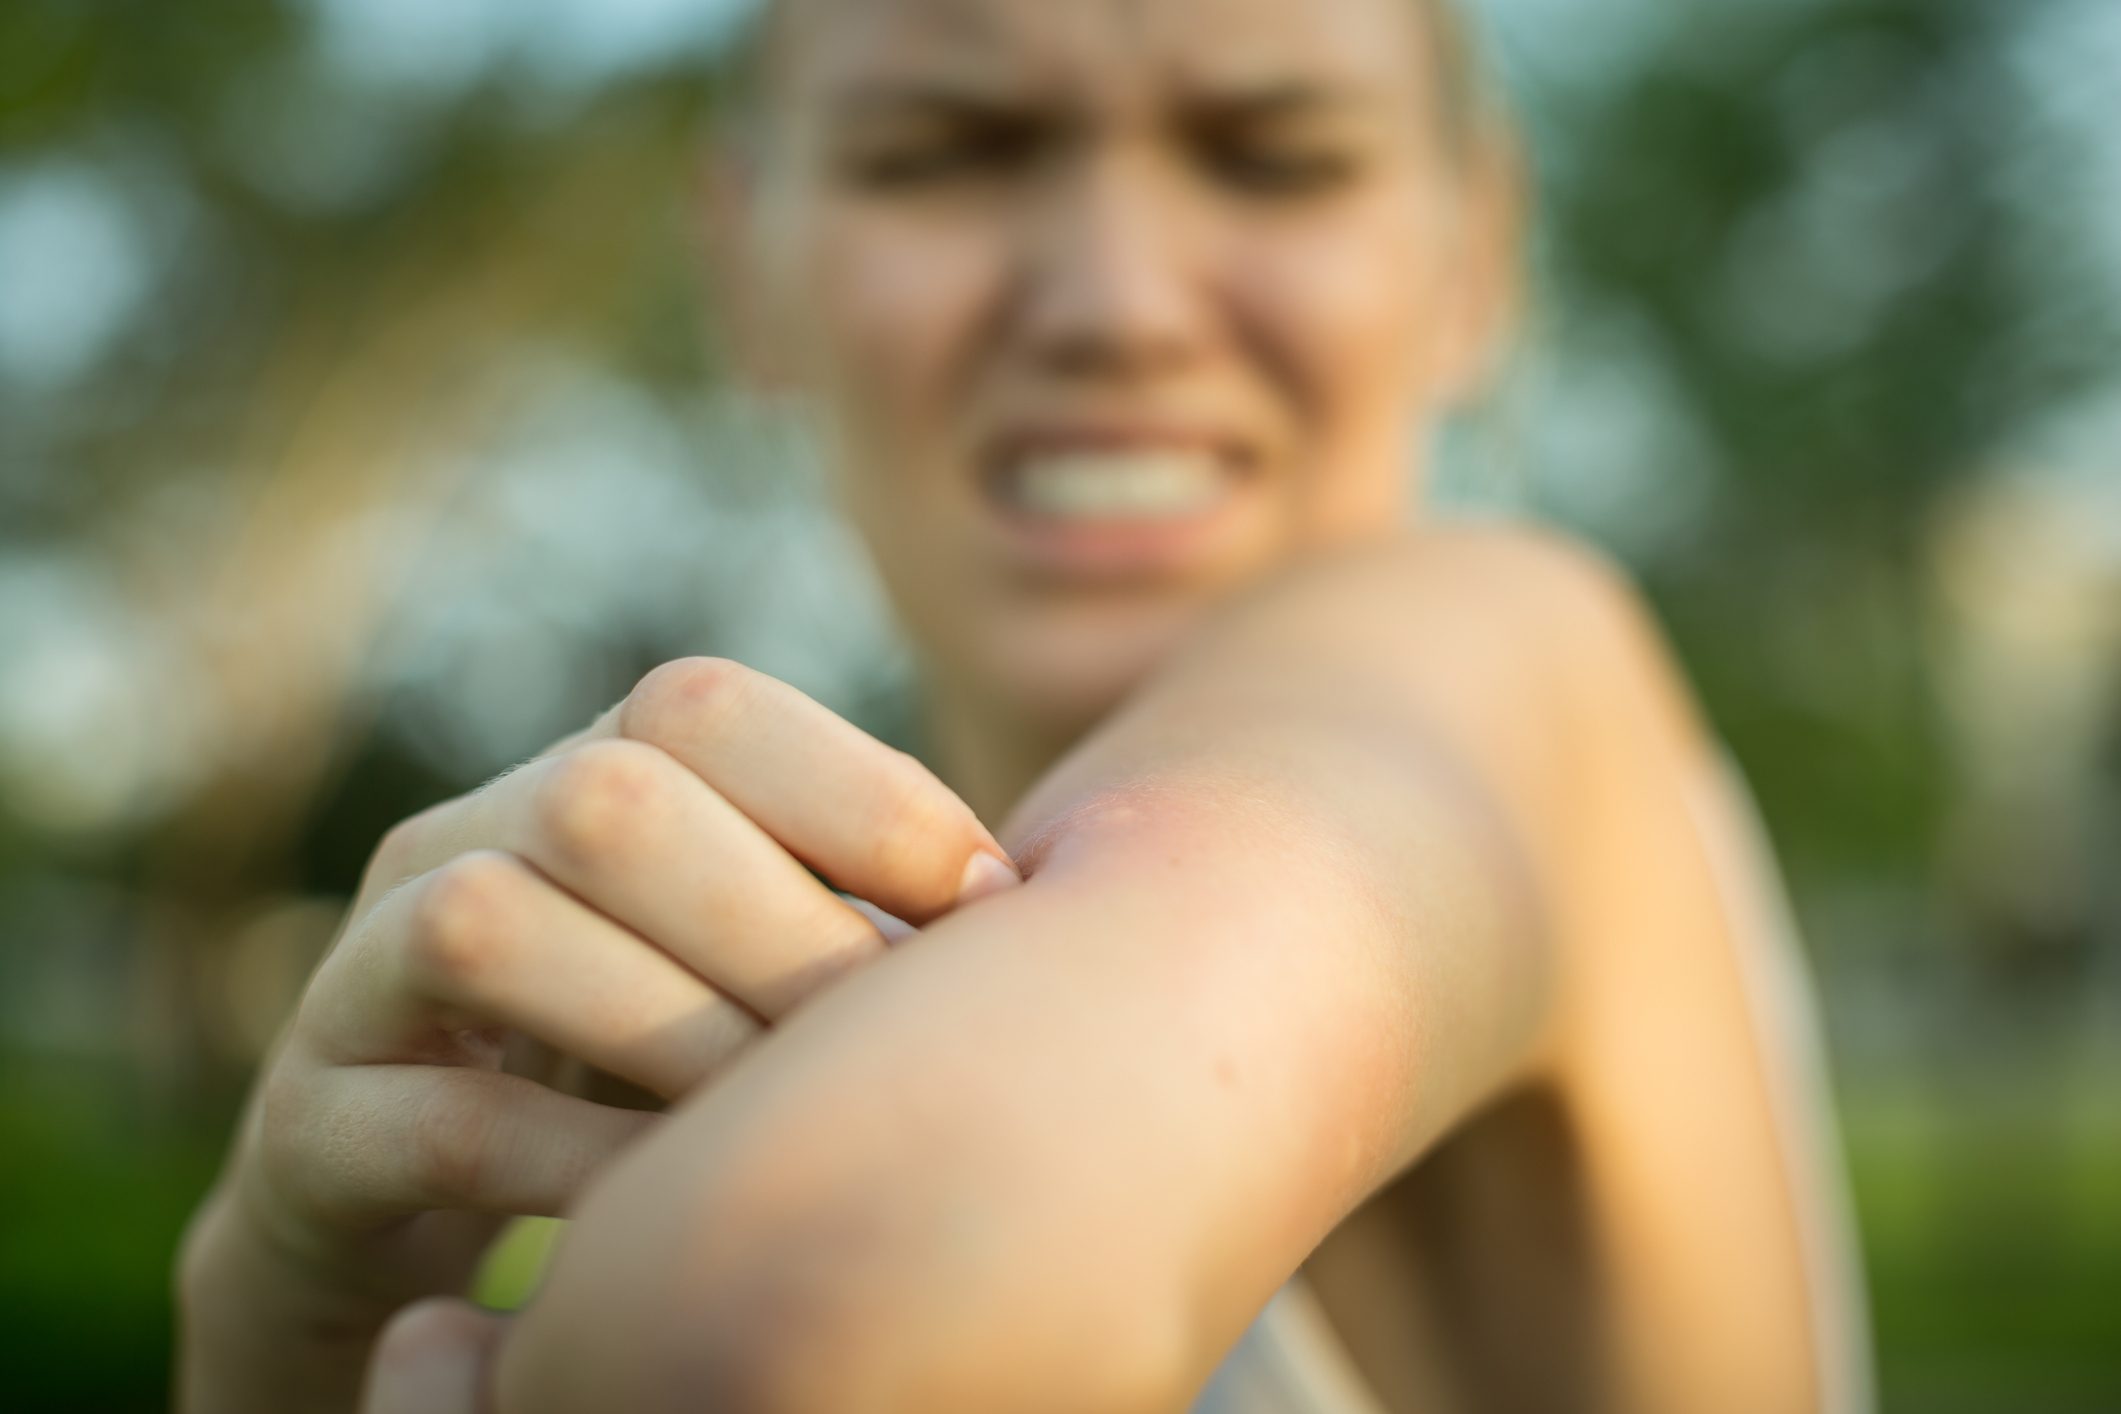 Here's How to Tell the Difference Between a Chigger Bite and a Mosquito Bite